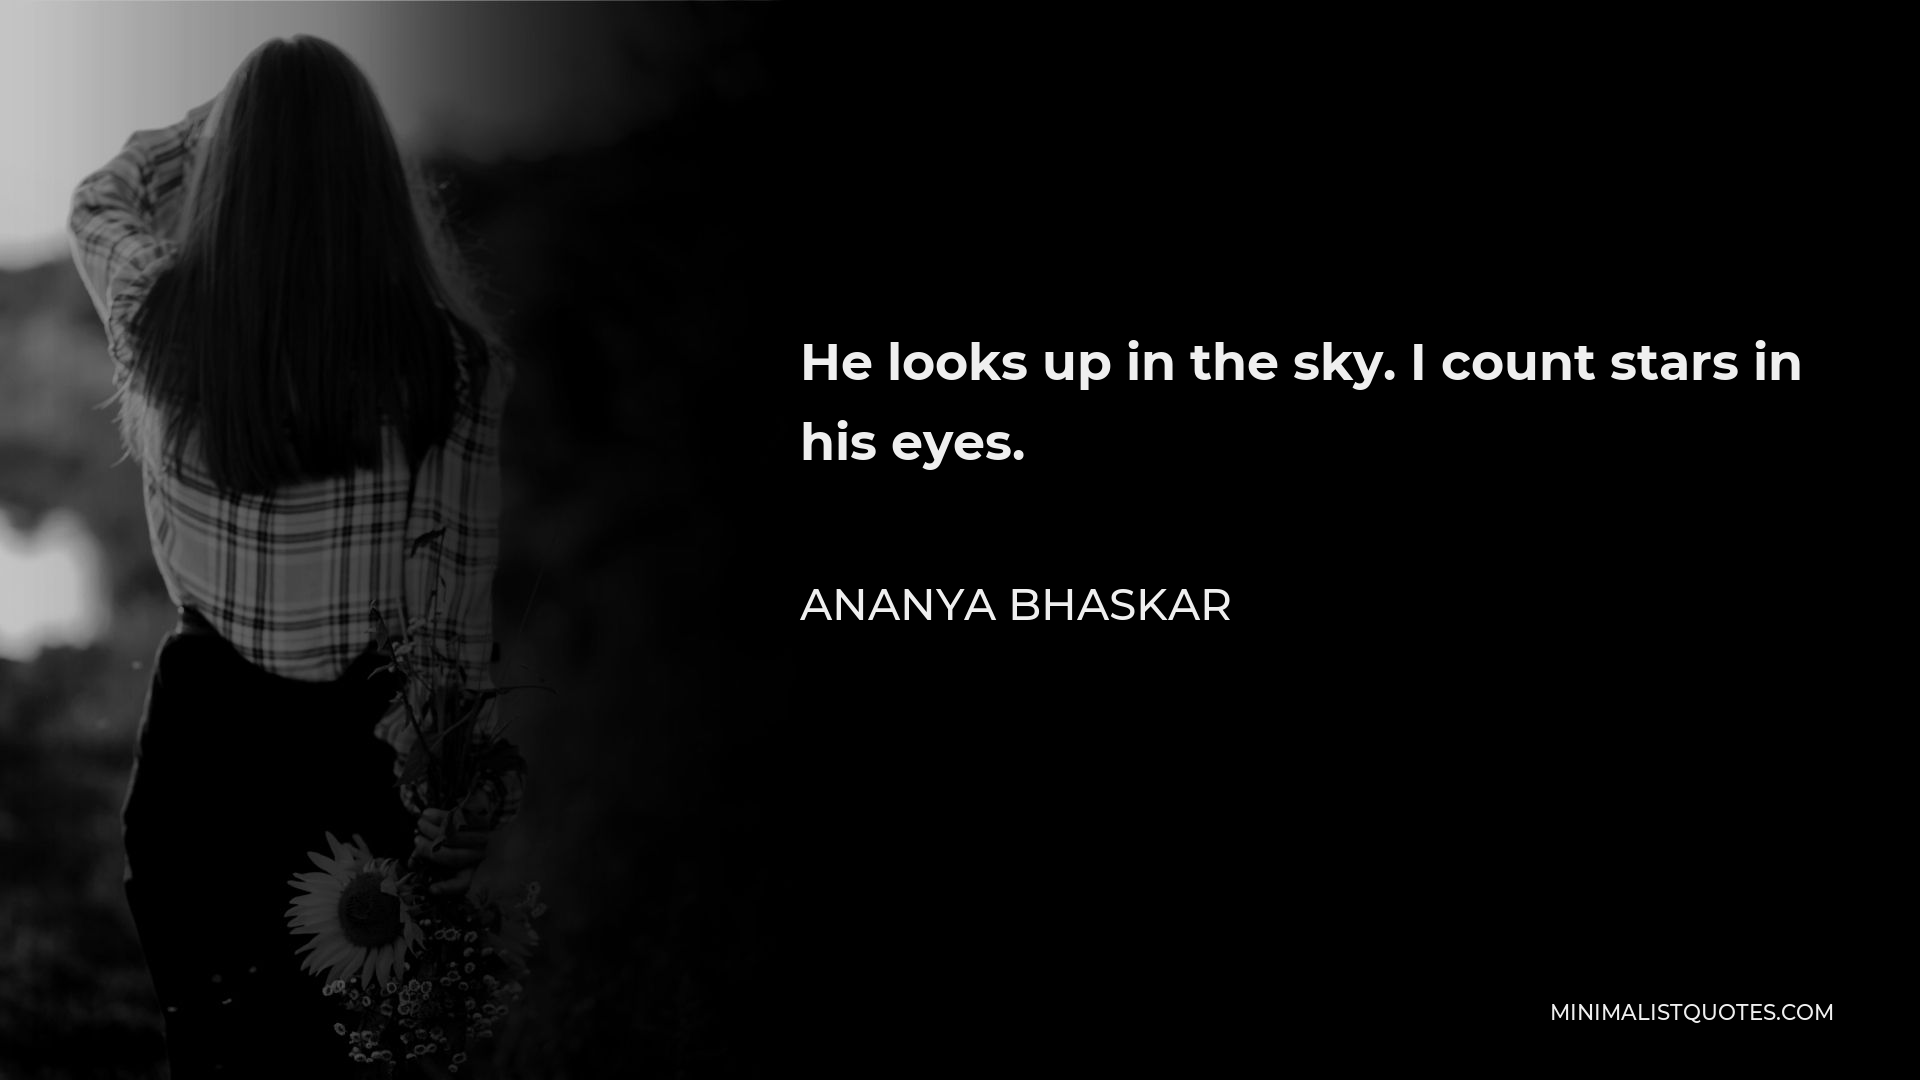 Ananya Bhaskar Quote - He looks up in the sky. I count stars in his eyes.